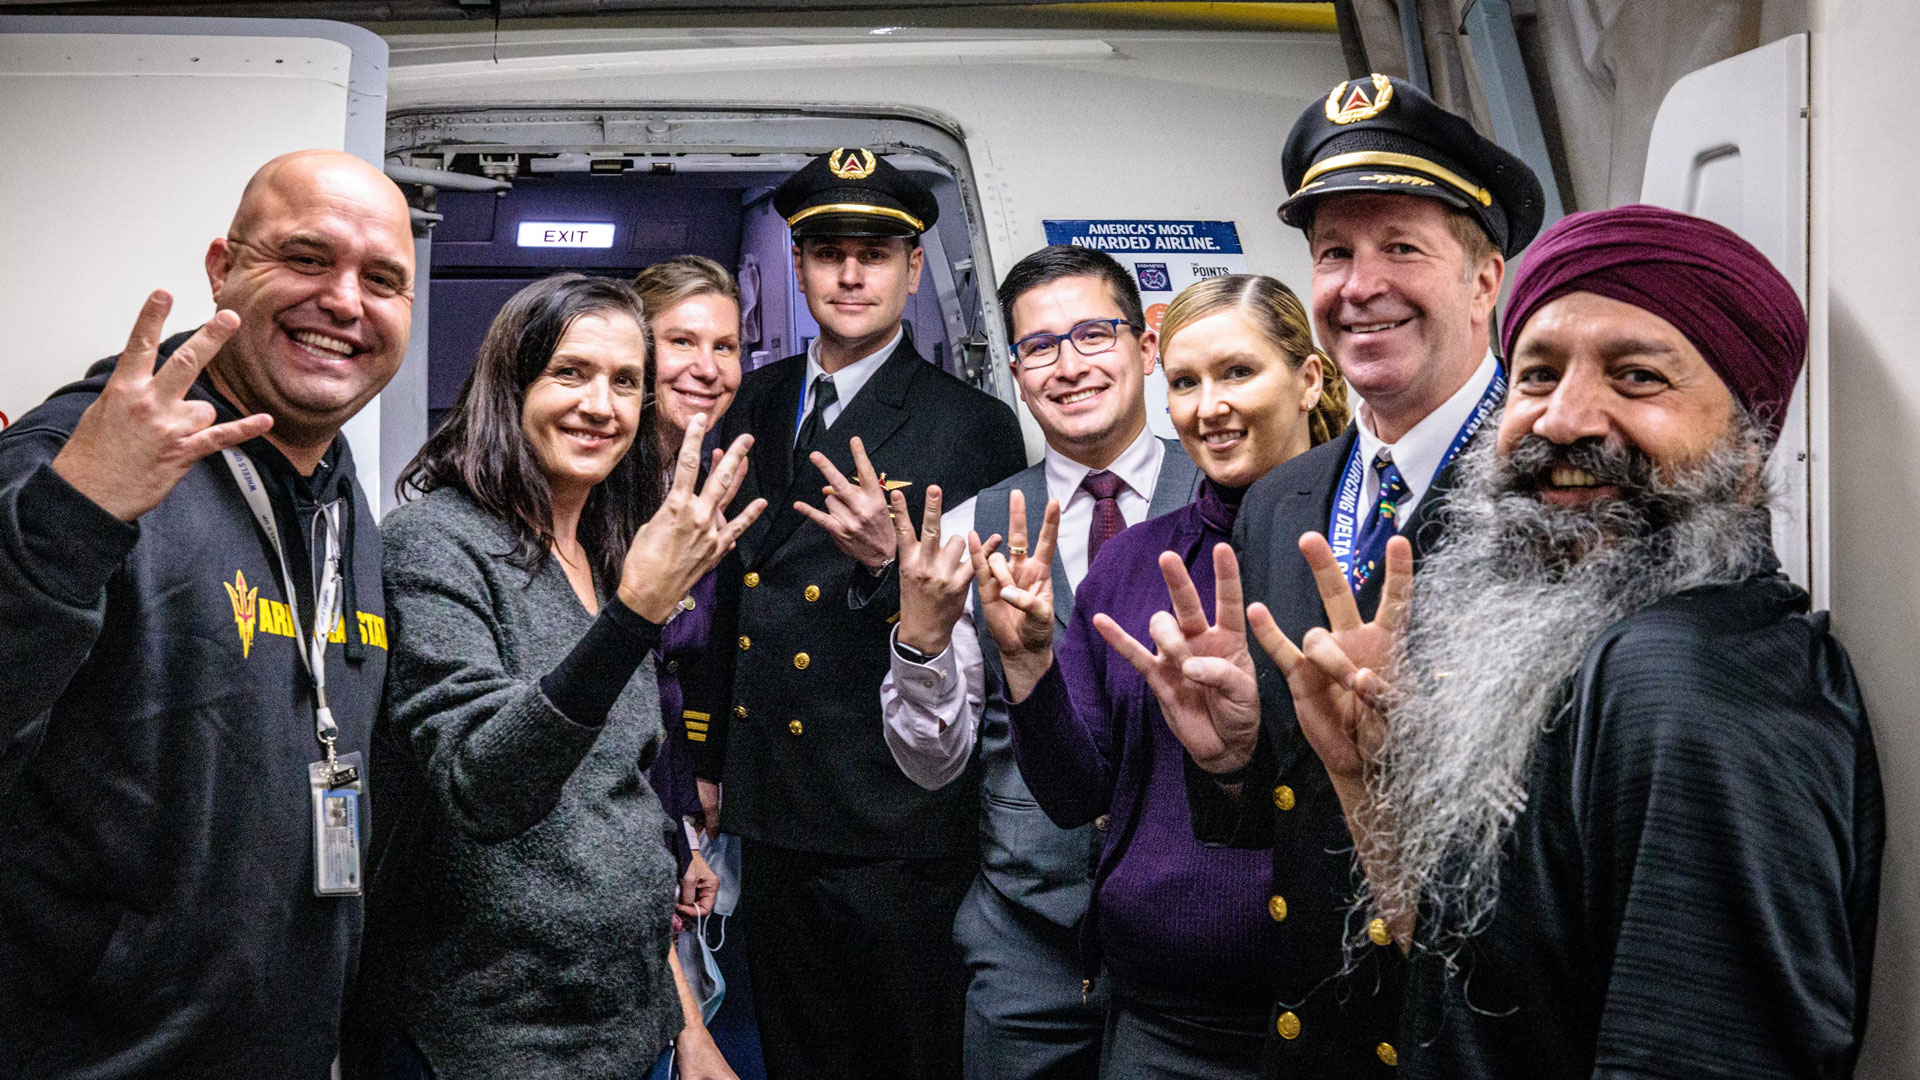 A group of people poses on an airplane while doing the ASU pitchfork hand sign.